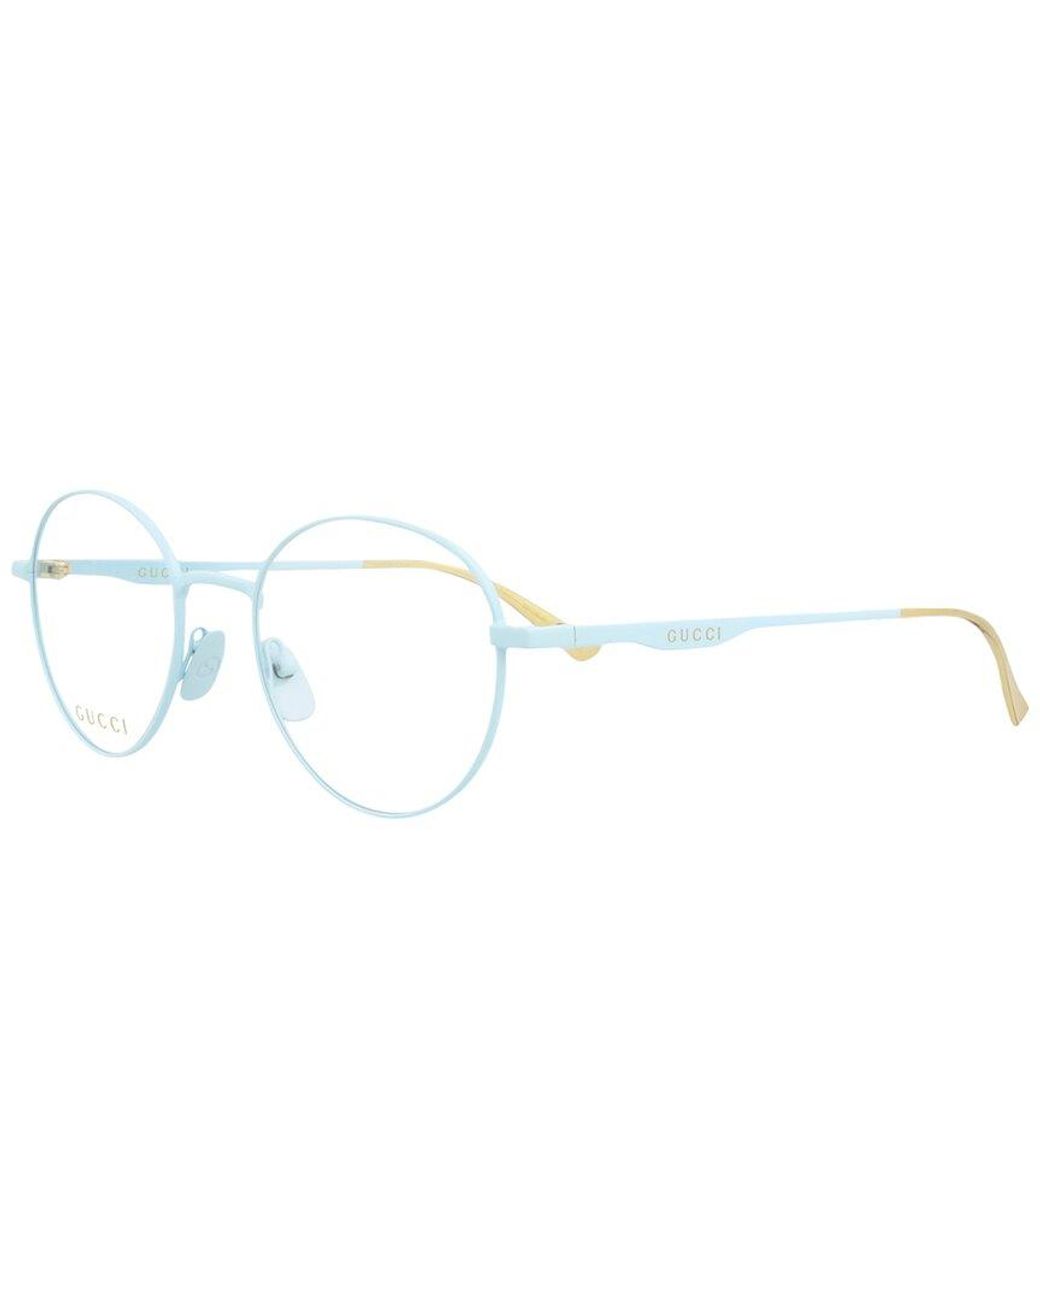 Gucci GG0337O 51mm Optical Frames in White | Lyst